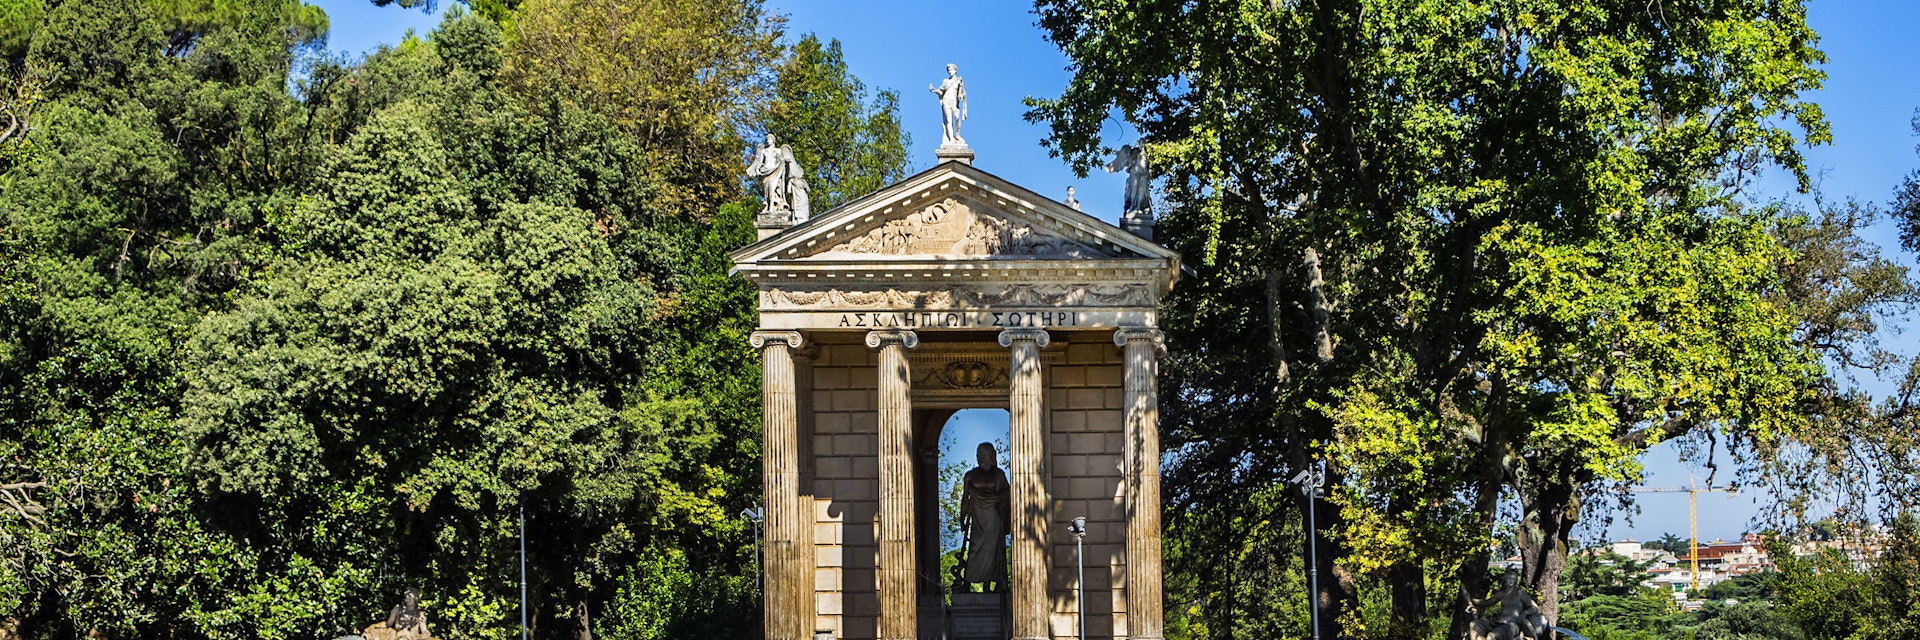 The lakeside Temple of Aesculapius in in the gardens of the Villa Borghese.
1168486960
ancient, architecture, art, attraction, capital, classical, culture, european, famous, gardens, historical, history, holiday, italia, italian, italy, landmark, monument, old, place, roma, roman, rome, sculpture, sightseeing, stone, temple, tourism, tourist, touristic, travel, vacation, villa borghese